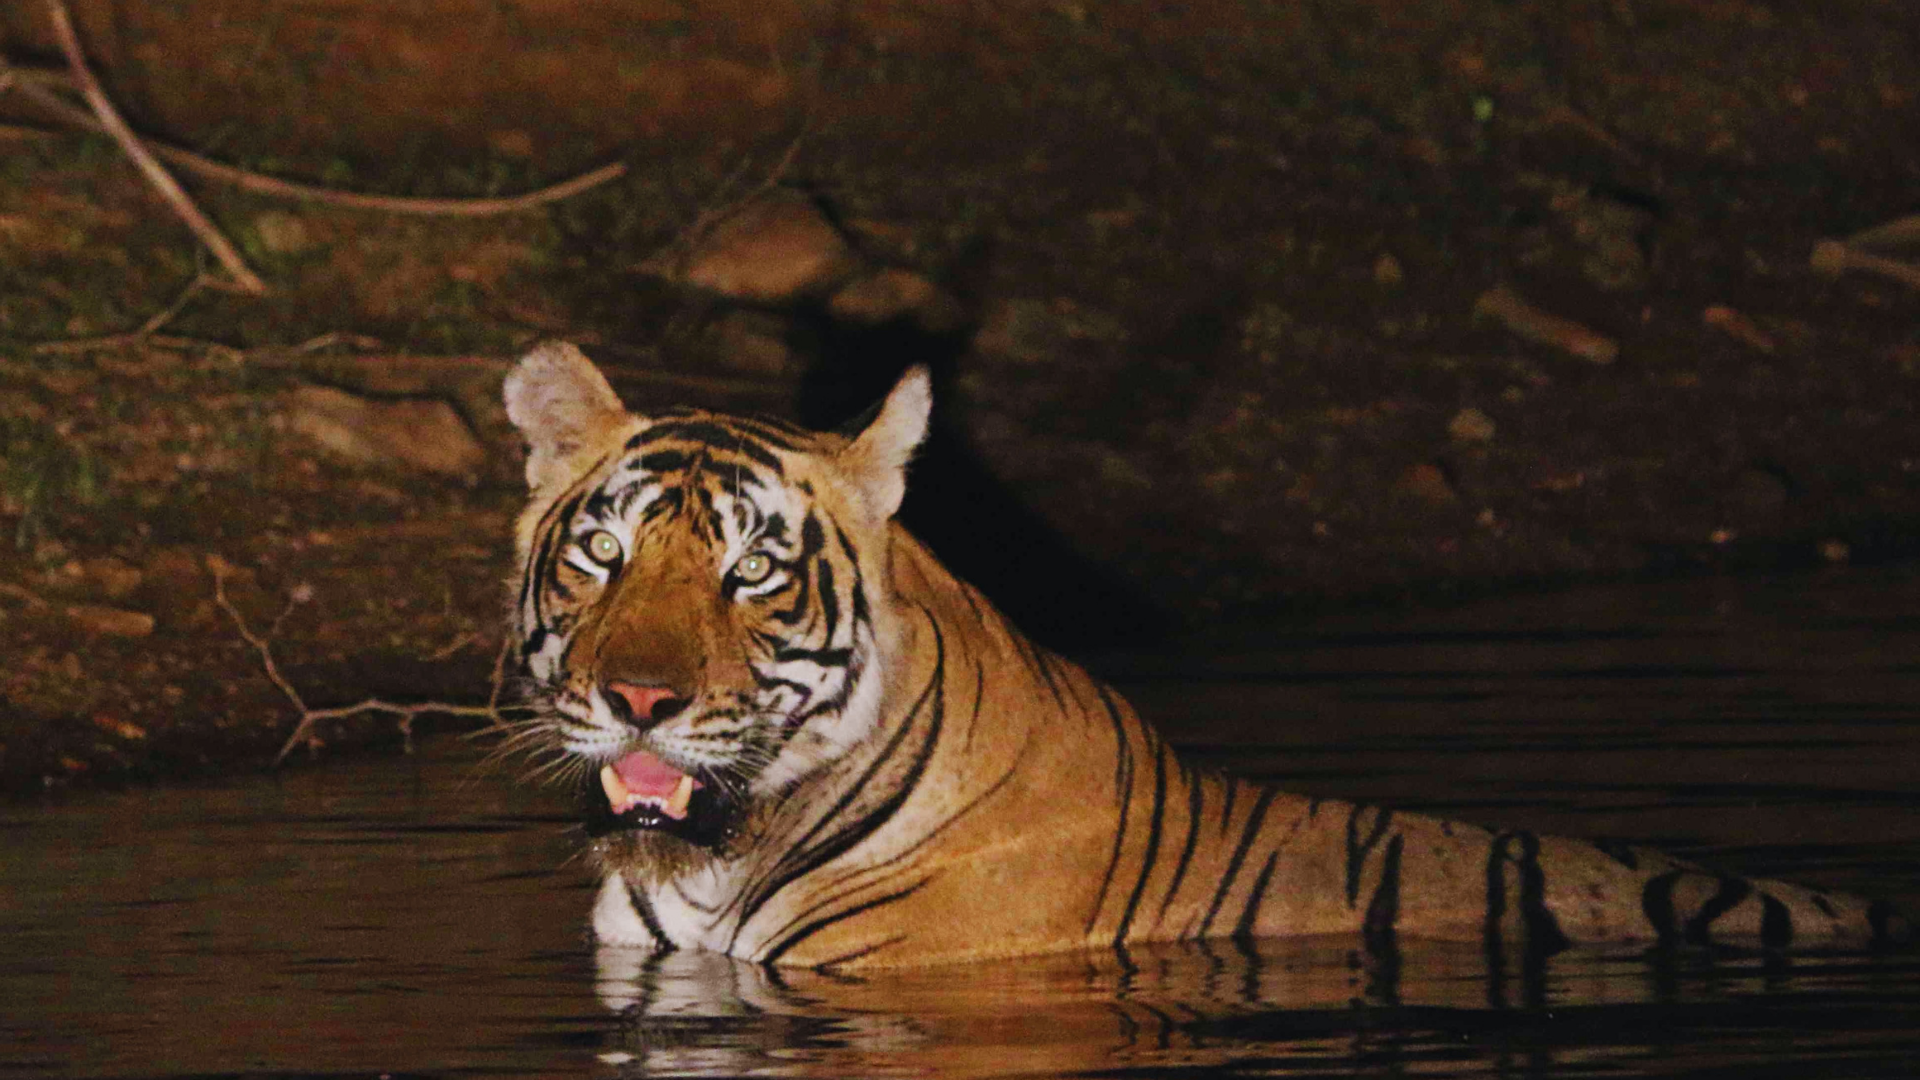 ST-13, an Indian Royal Bengal tiger, seen in a river in Sariska reserve in Rajasthan. The tiger, last seen in mid-January, has been declared missing